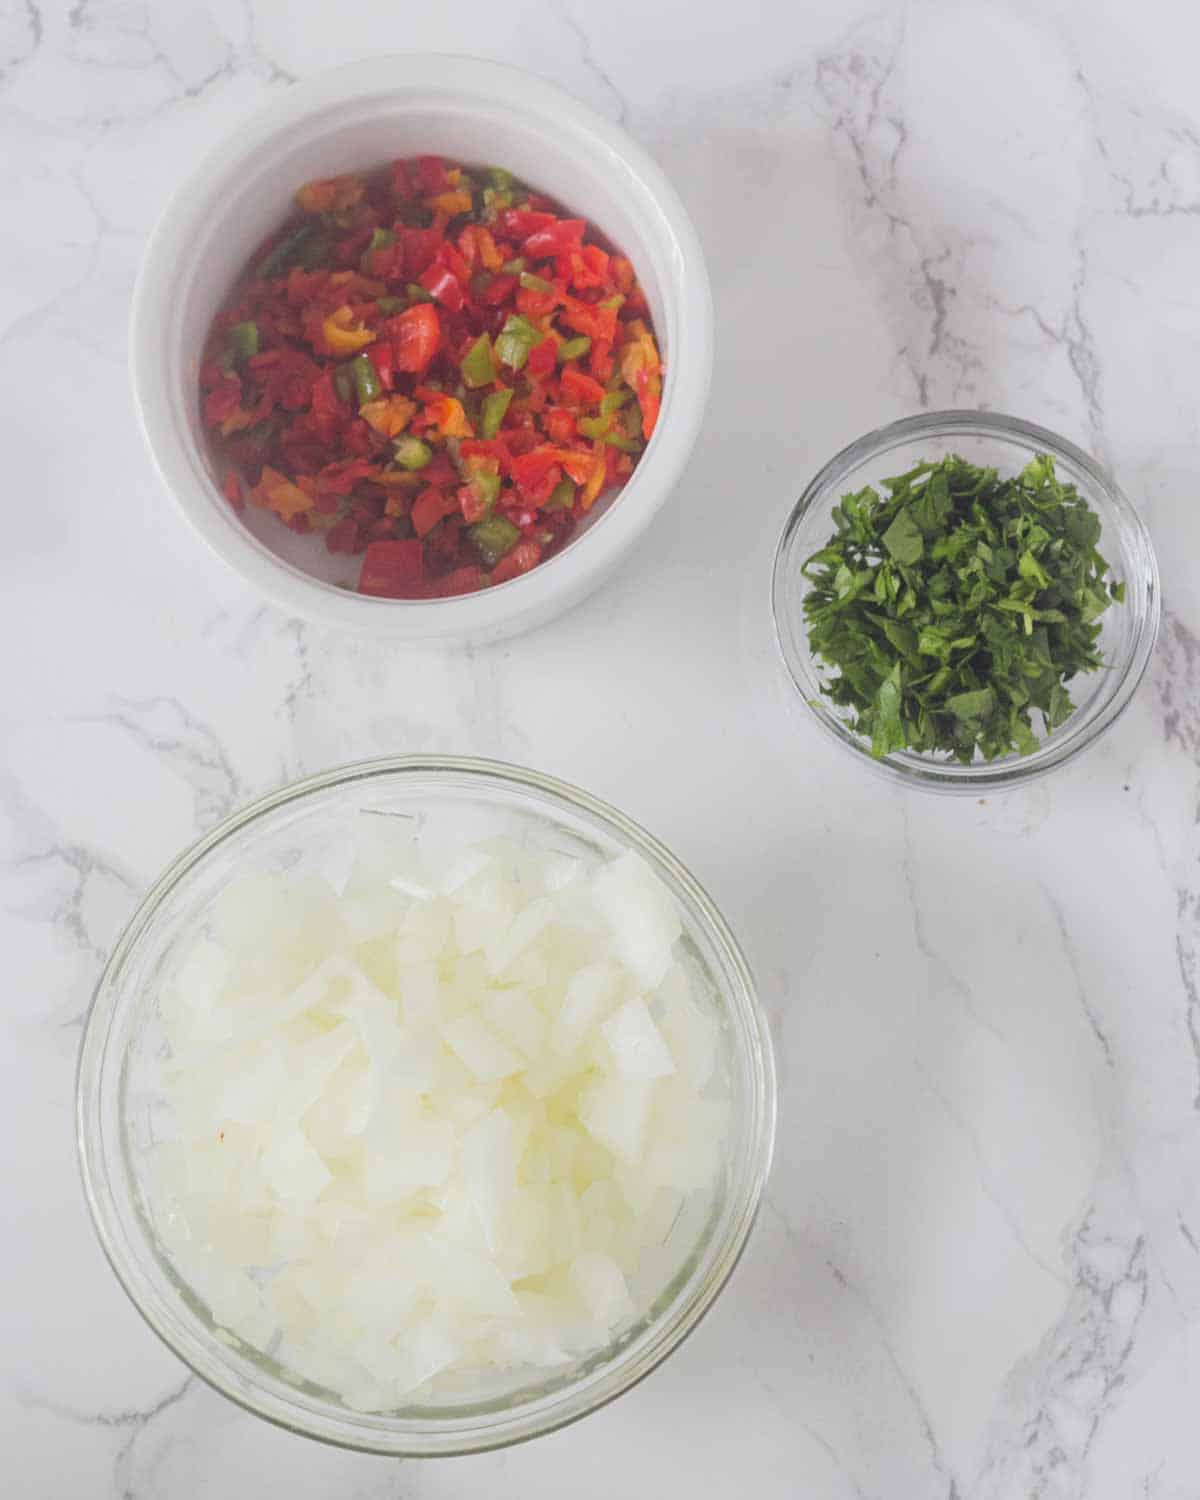 Sofrito ingredients chopped portioned.